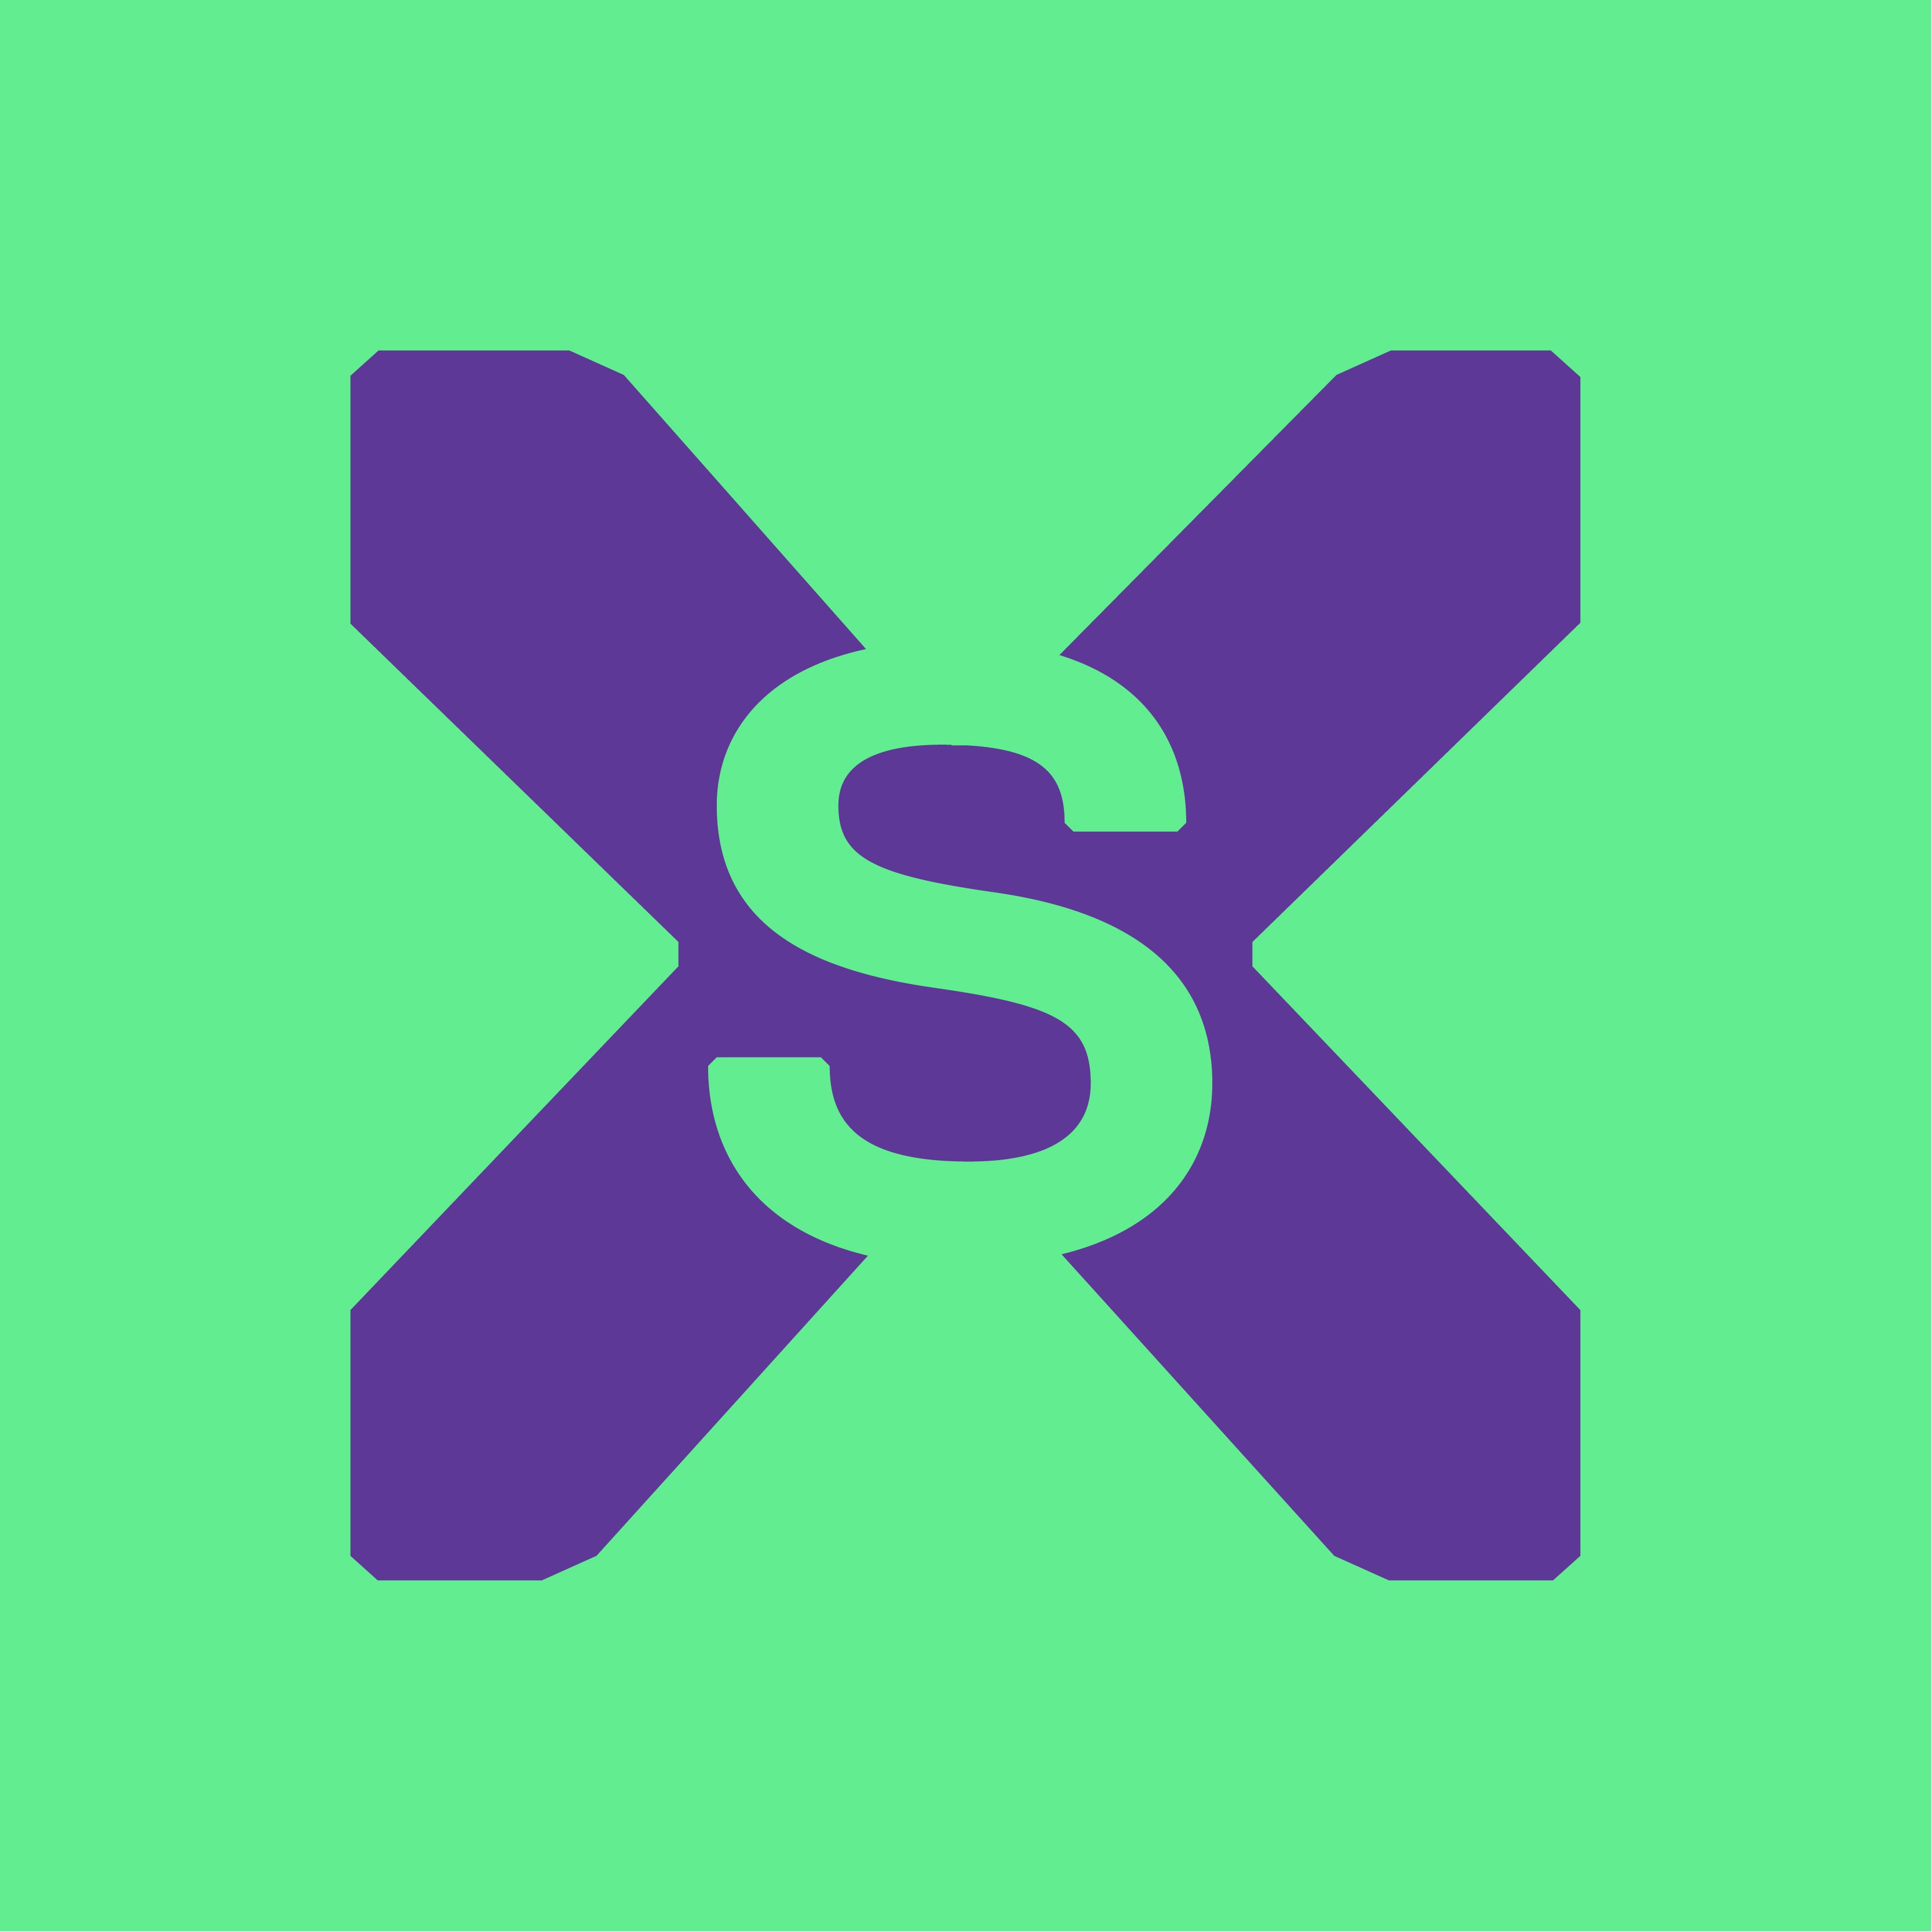 logo of purple cross with 's' cut out against a green background. 